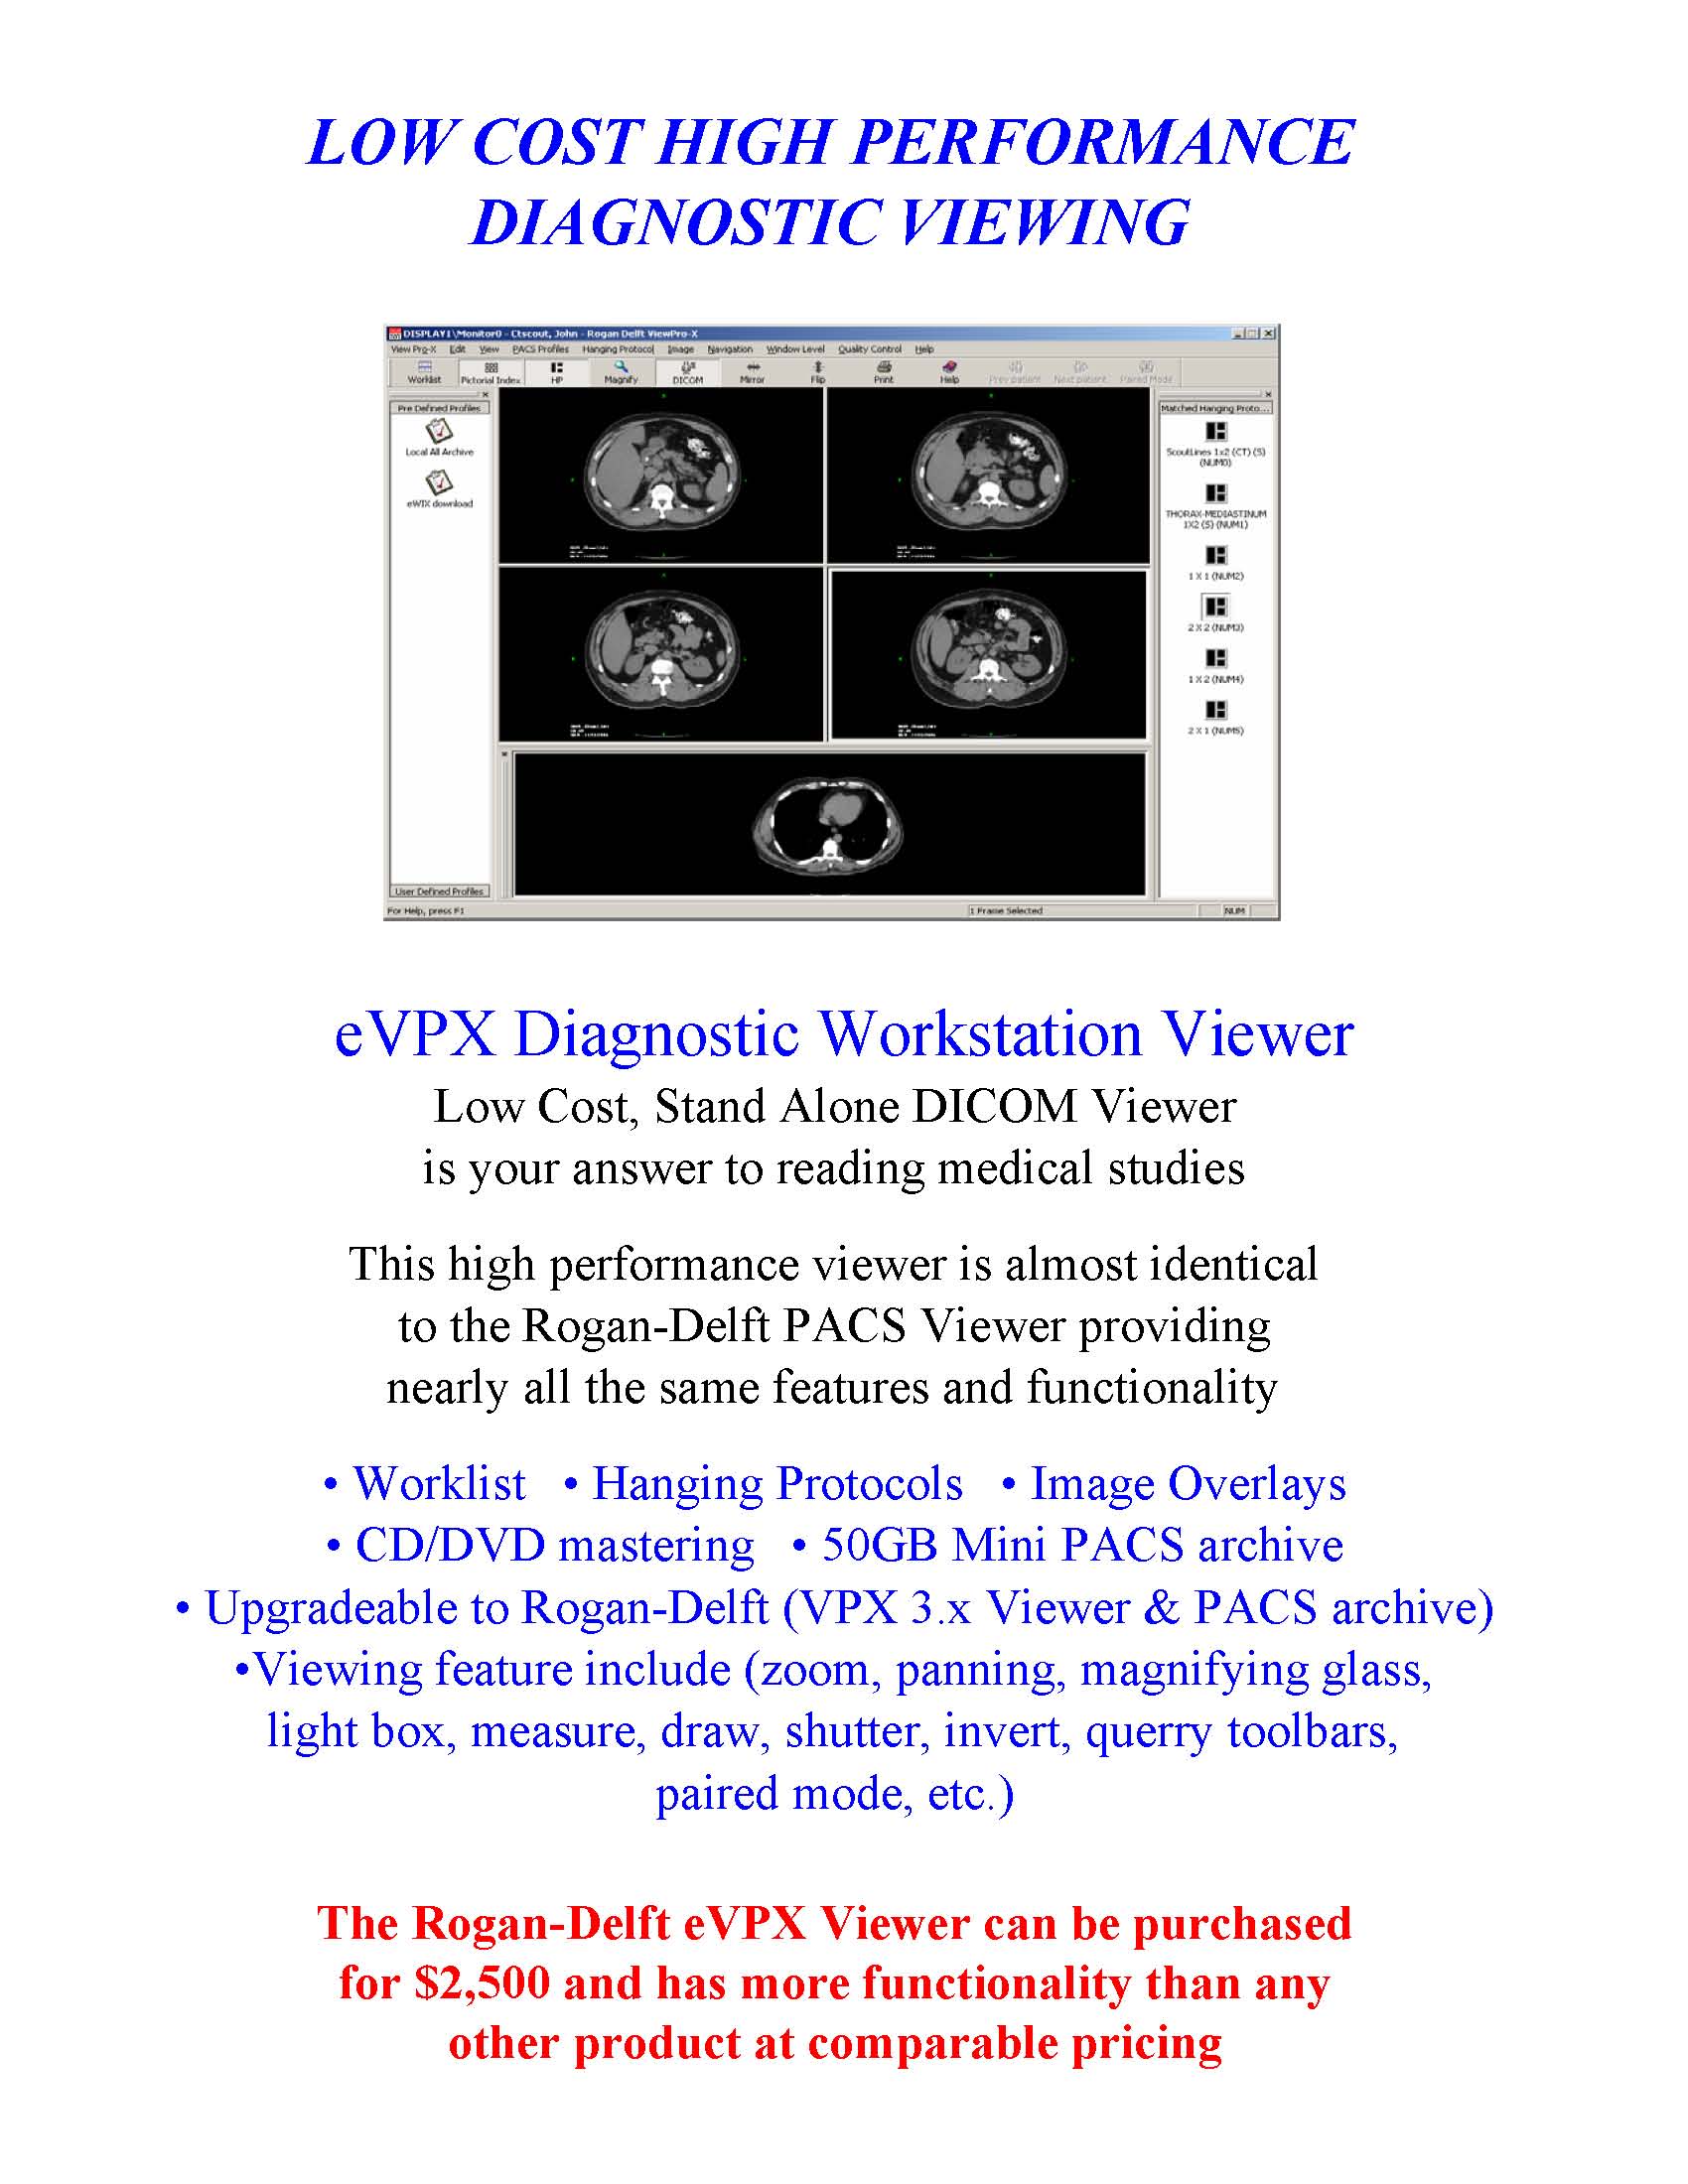 specially priced 
diagnostic workstation viewer